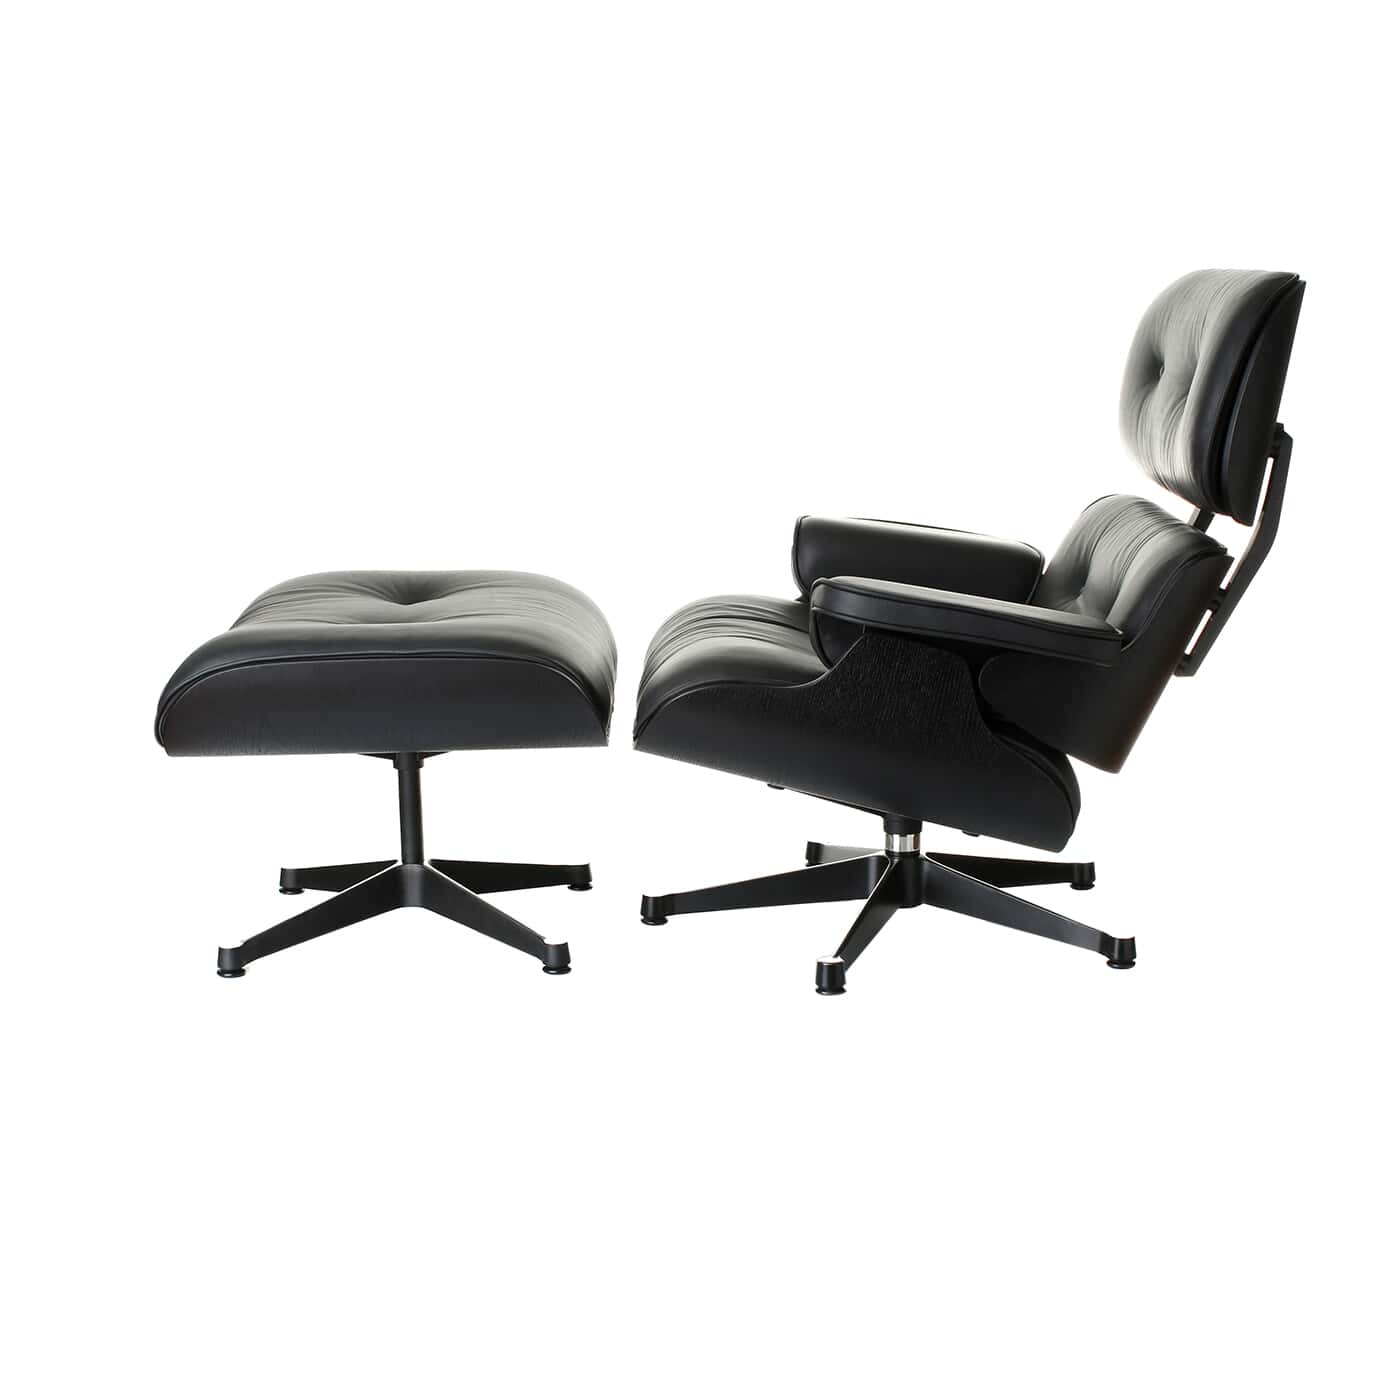 Lounge Chair And Ottoman, Eames Lounge Chair And Ottoman Replica